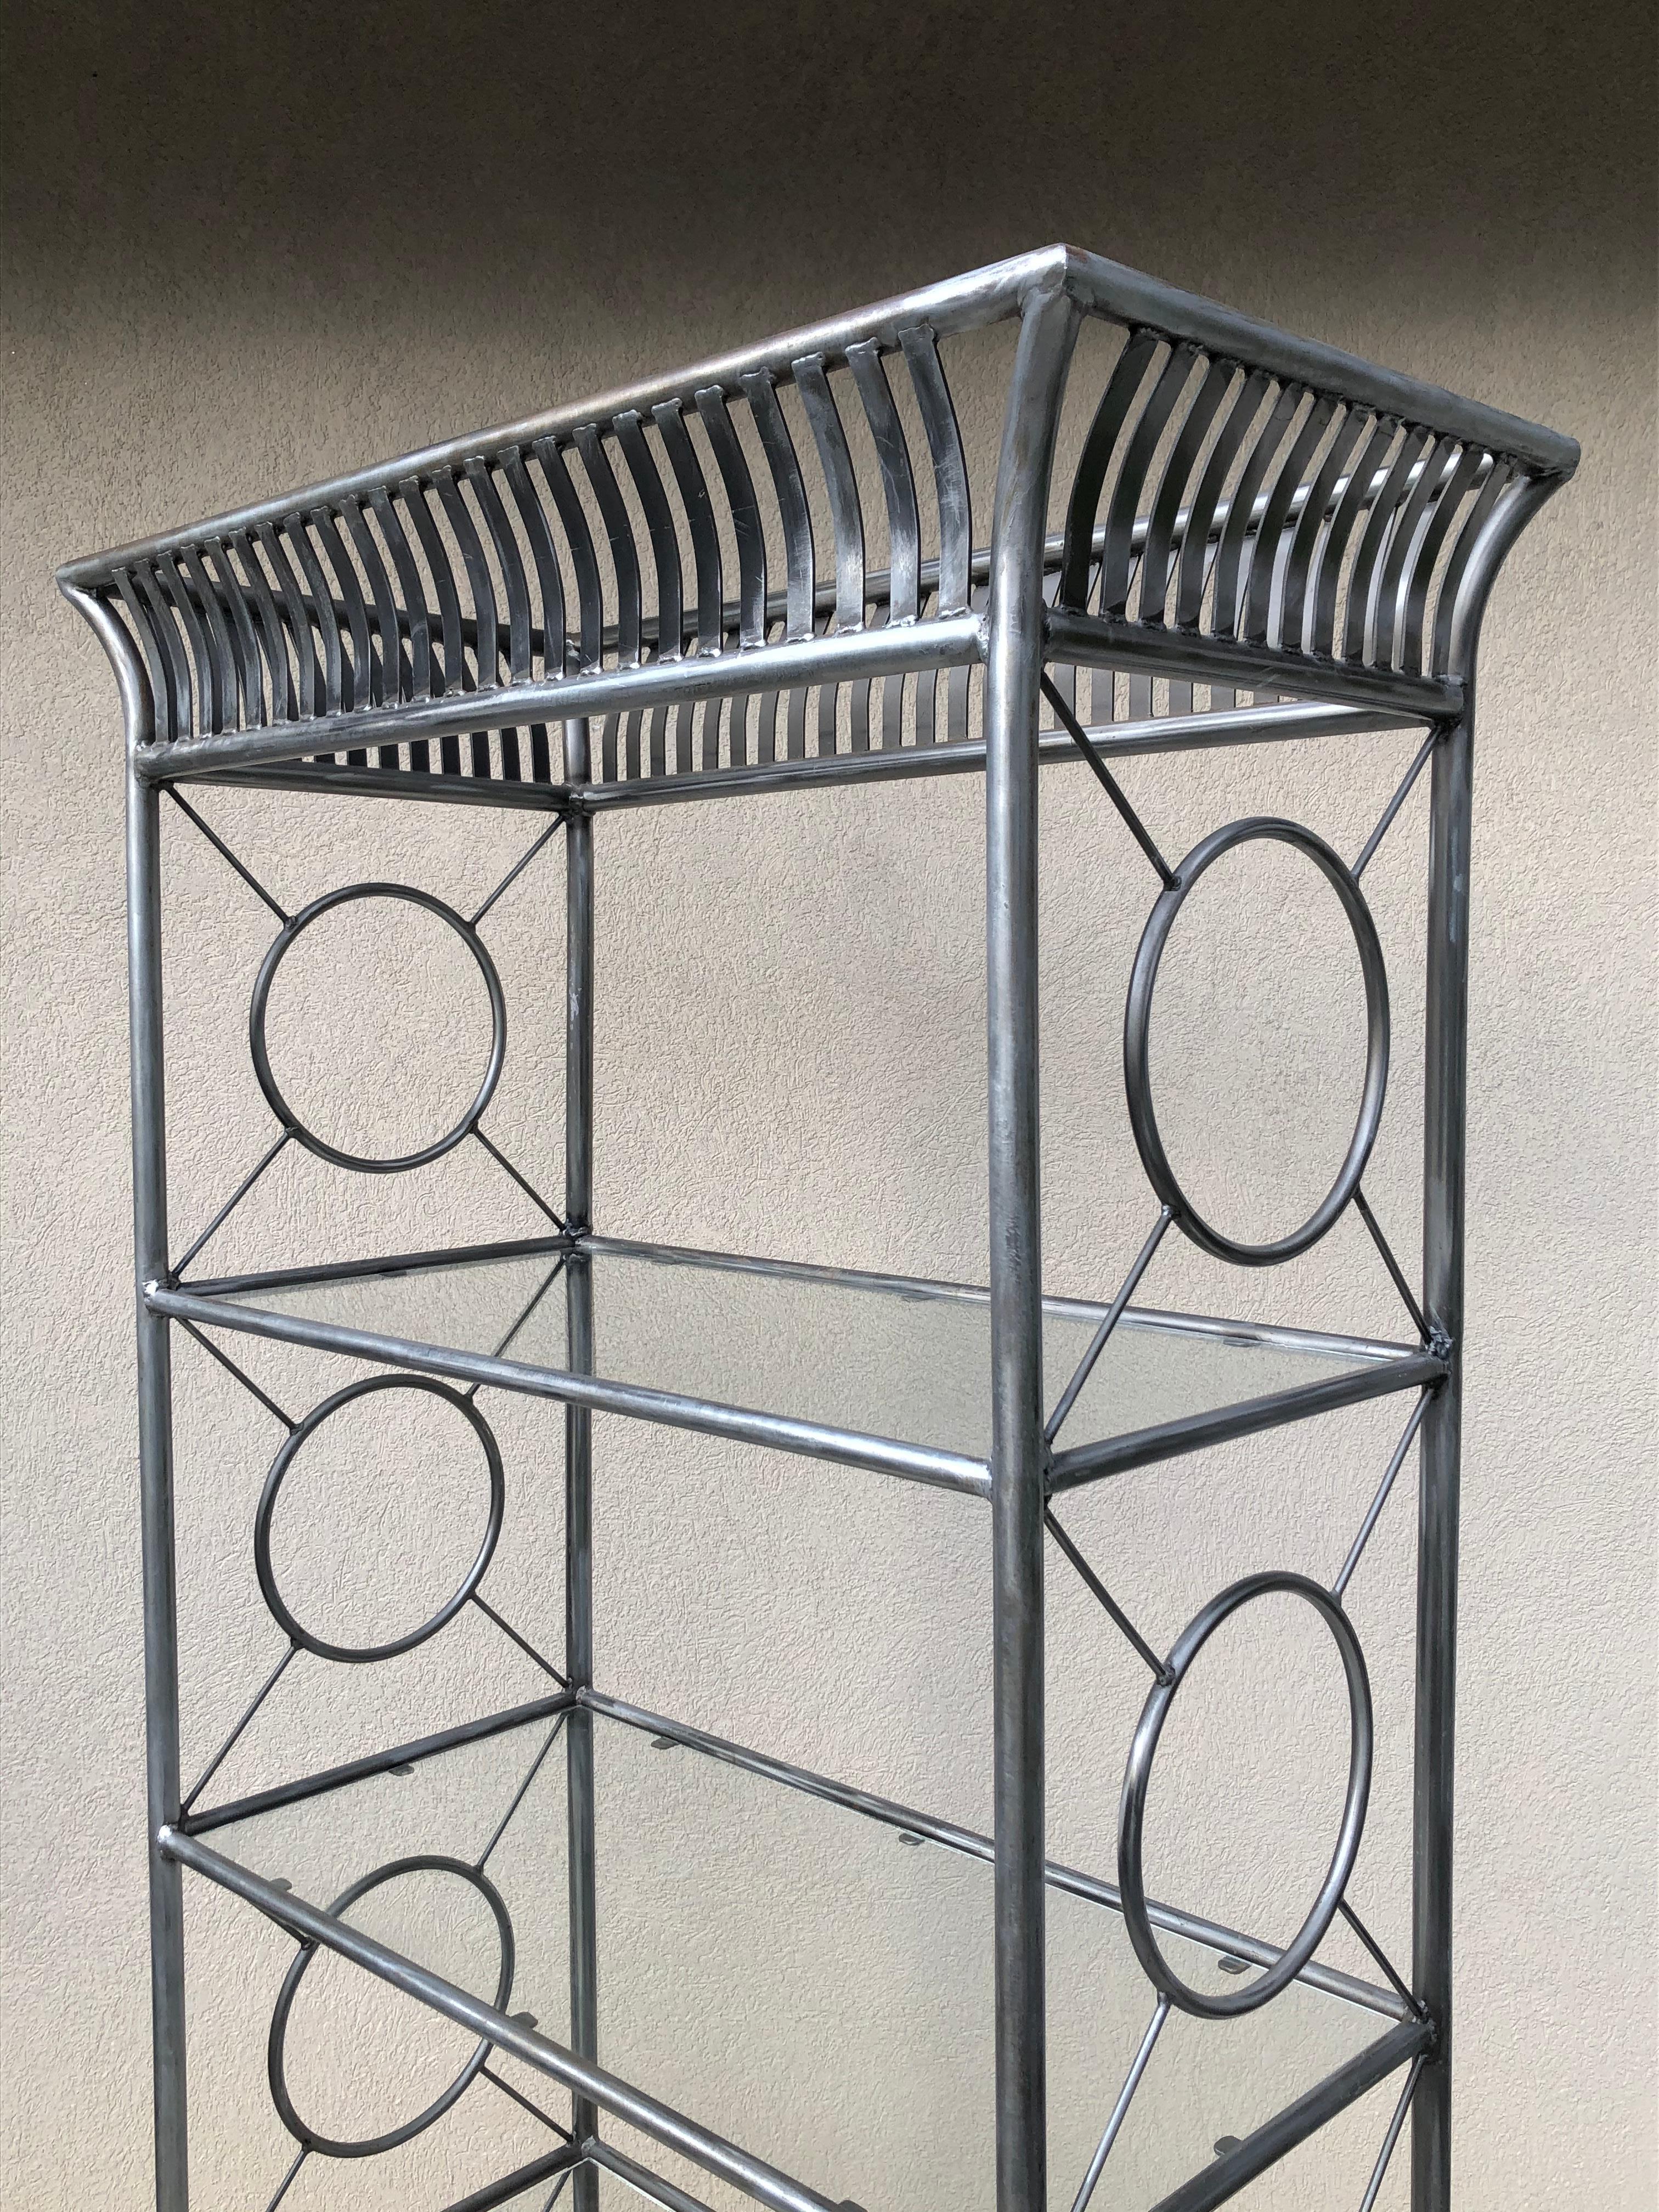 Anodized Tall Etagere Silver Steel Glass Hollywood Regency Maison Jansen Style For Sale